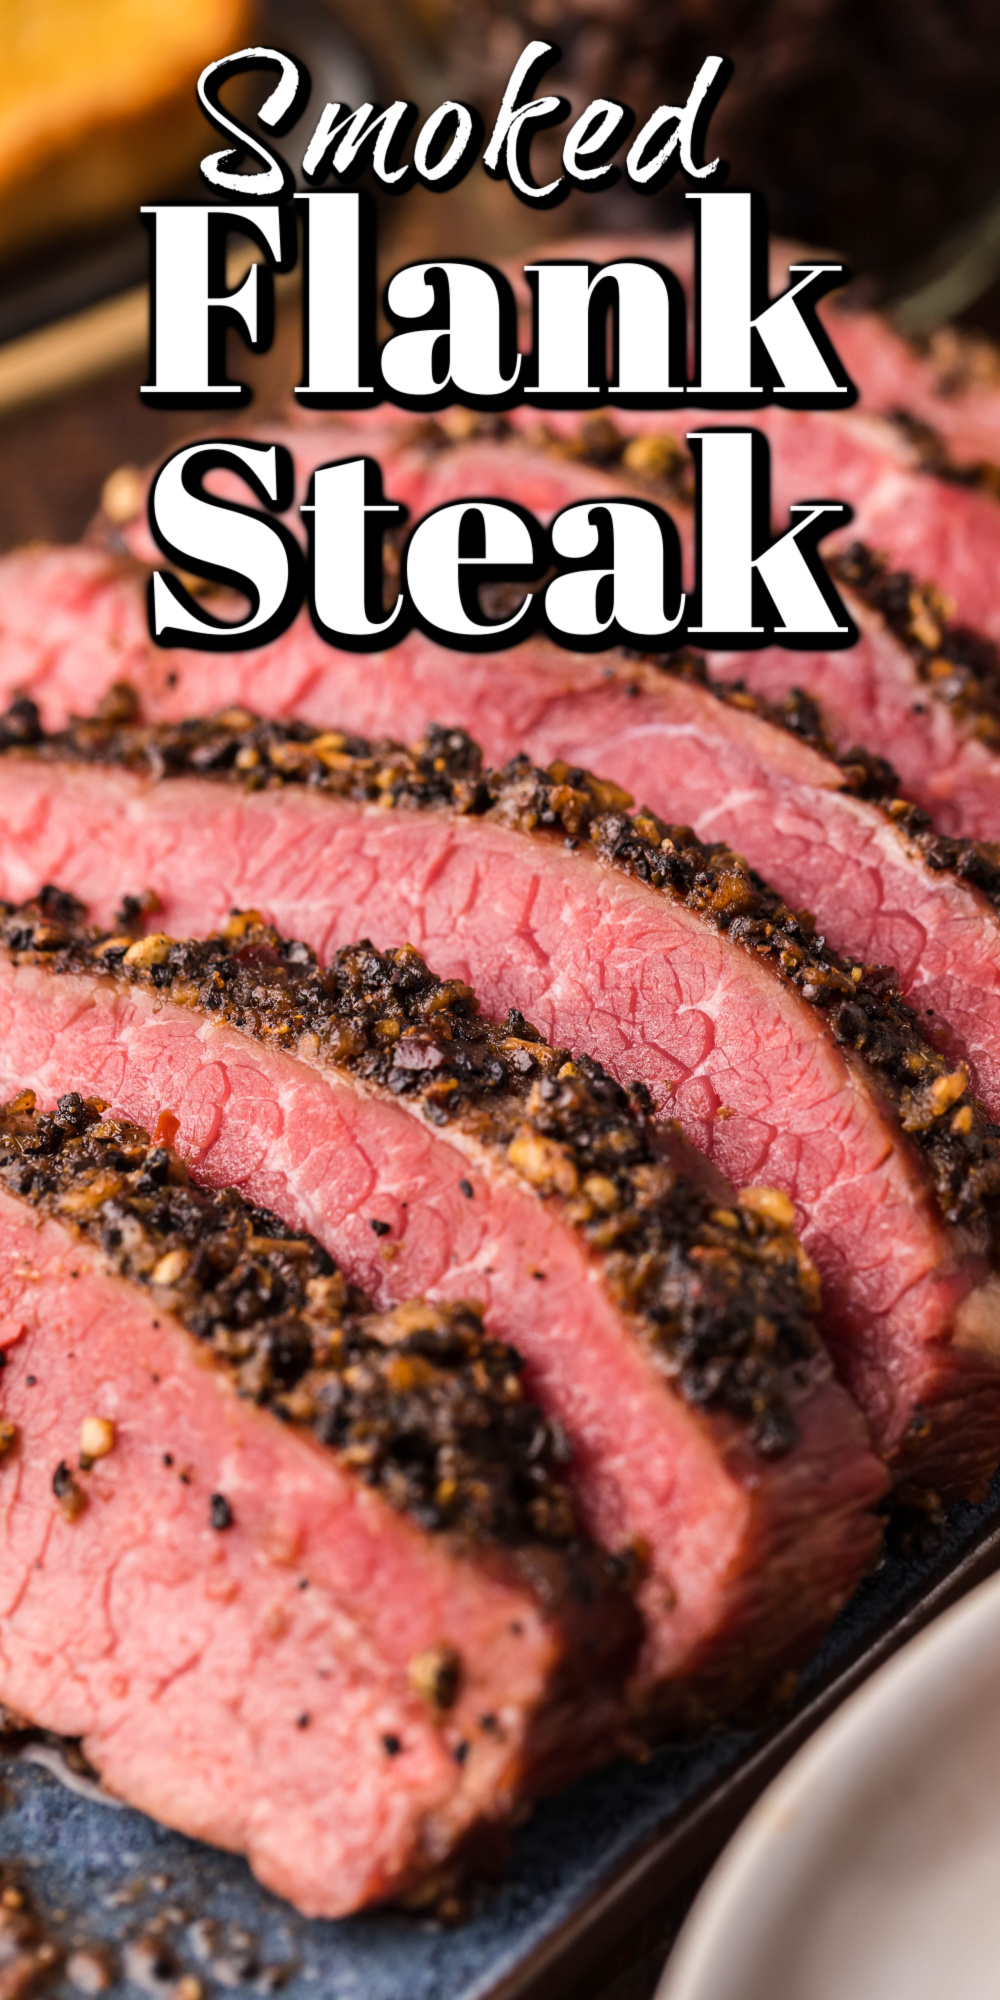 This amazing hickory Smoked Flank Steak is so flavourful, the rub is awesome, and it has just a hint of citrus.